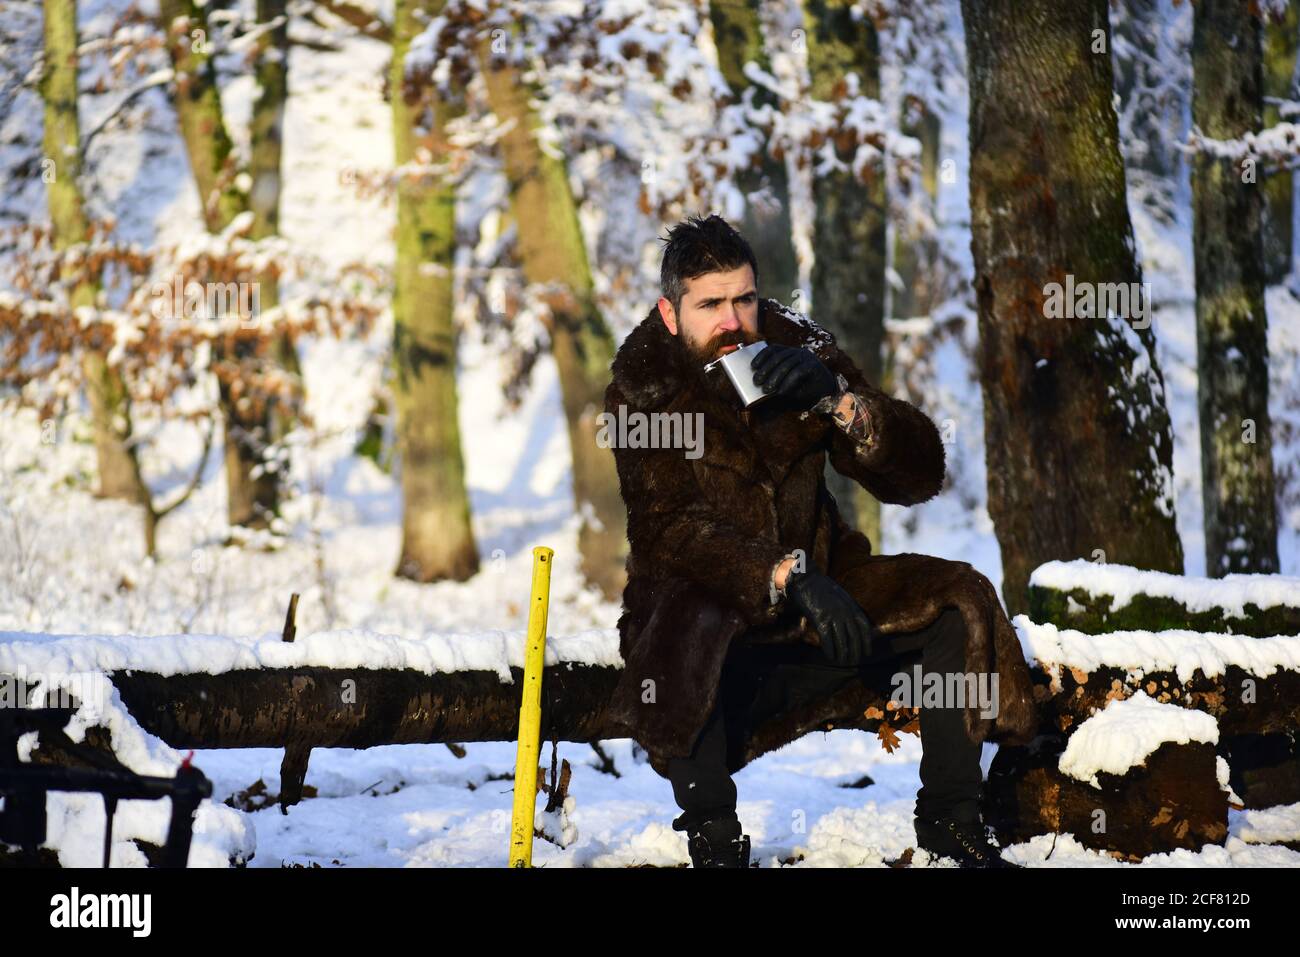 Man in fur coat drinks from metal flask. Macho with beard and mustache sits by yellow axe in forest. lumberjack concept. lumberjack man working in the winter forest. Frozen wanderer concept. Stock Photo